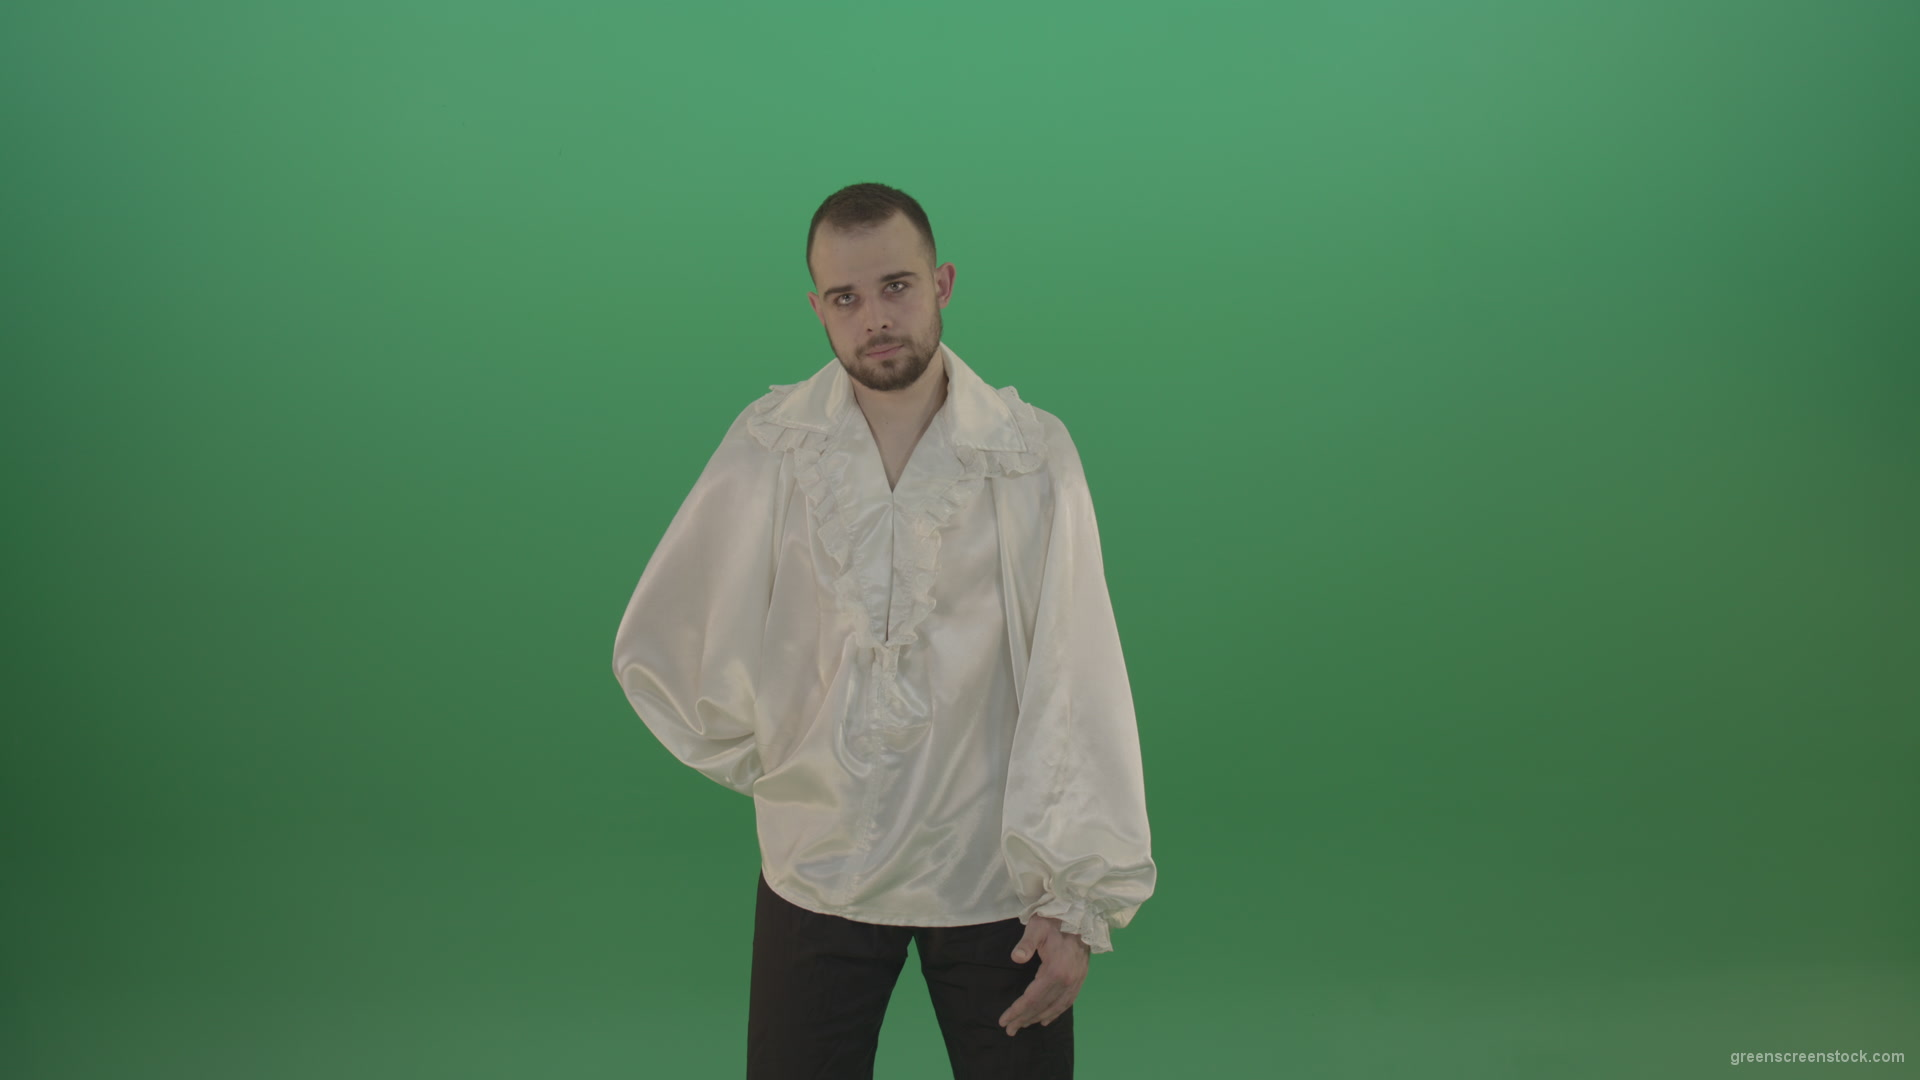 Man-in-white-shirt-shooting-with-pistol-hand-gun-isolated-in-green-screen-studio_001 Green Screen Stock